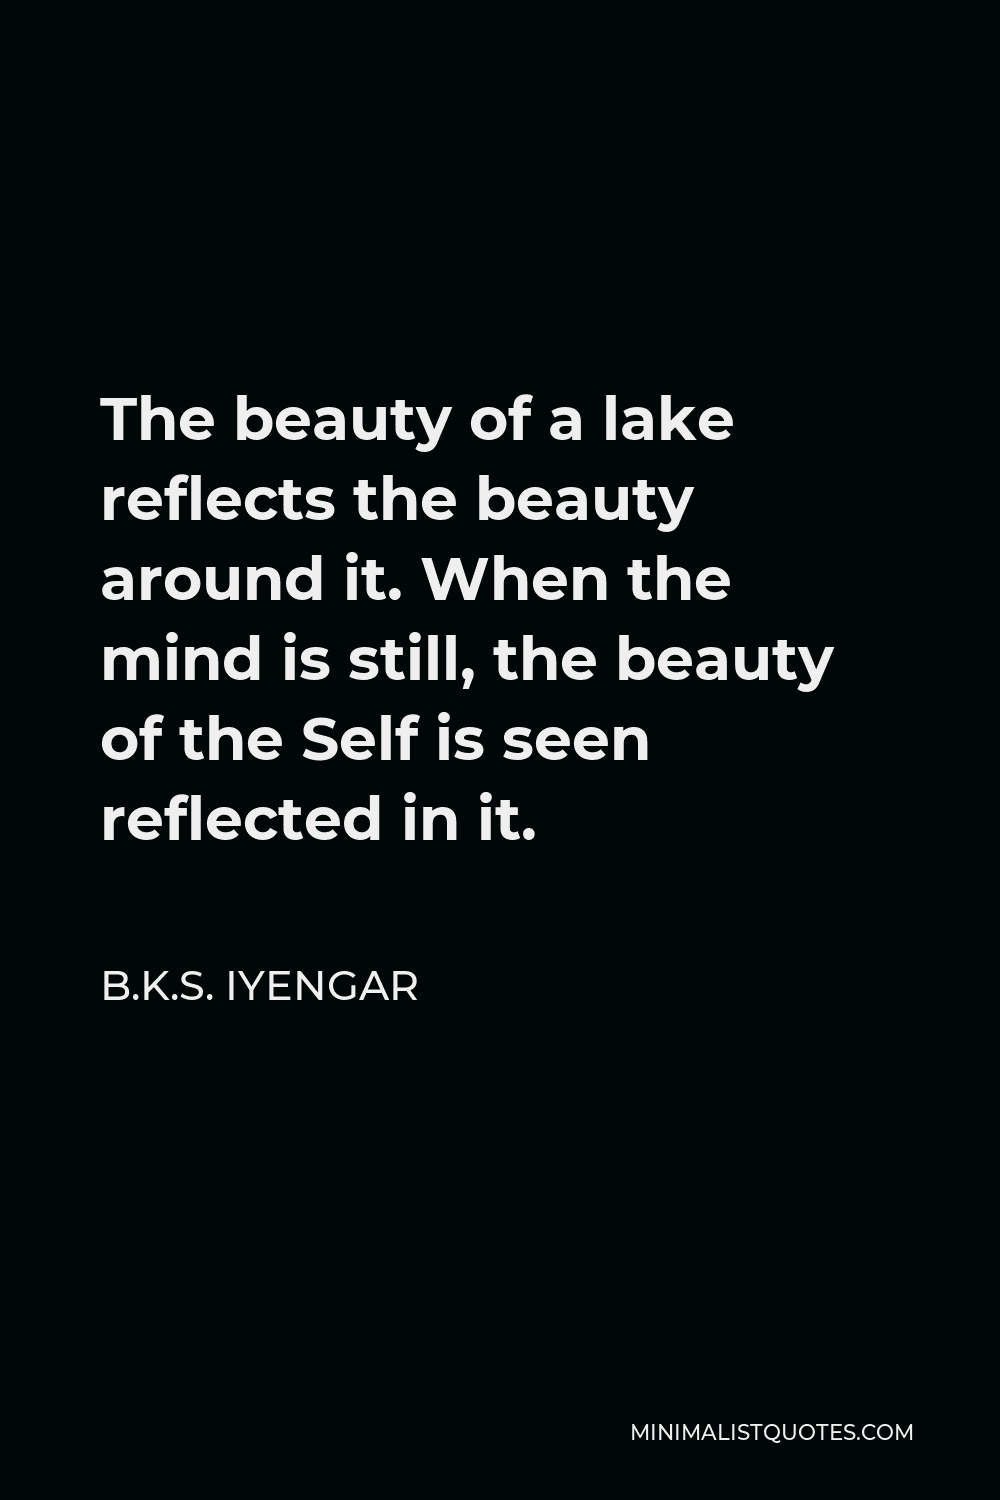 B.K.S. Iyengar Quote - The beauty of a lake reflects the beauty around it. When the mind is still, the beauty of the Self is seen reflected in it.